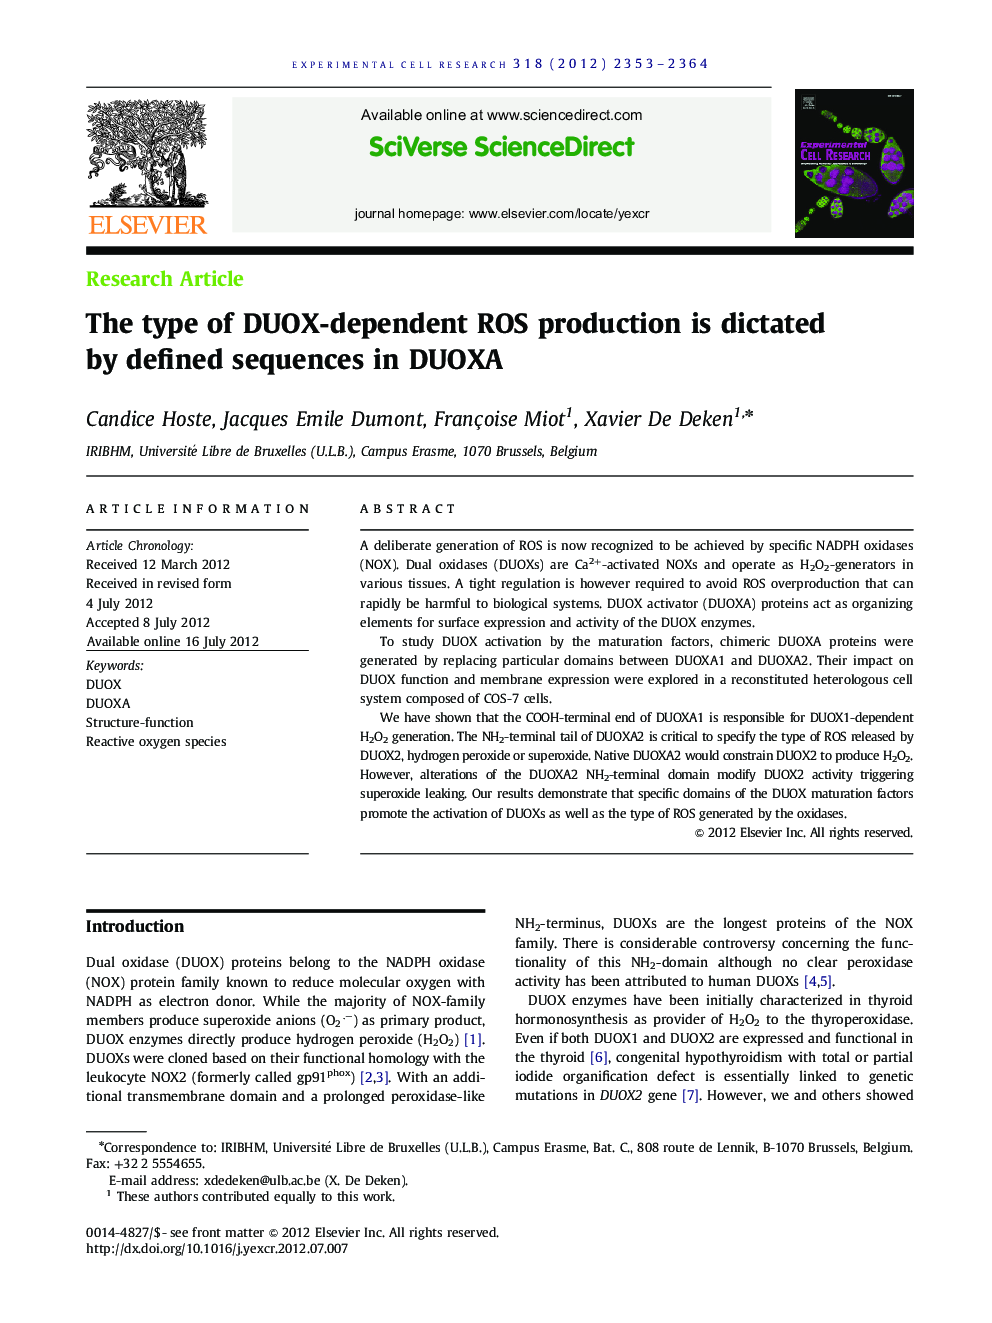 The type of DUOX-dependent ROS production is dictated by defined sequences in DUOXA